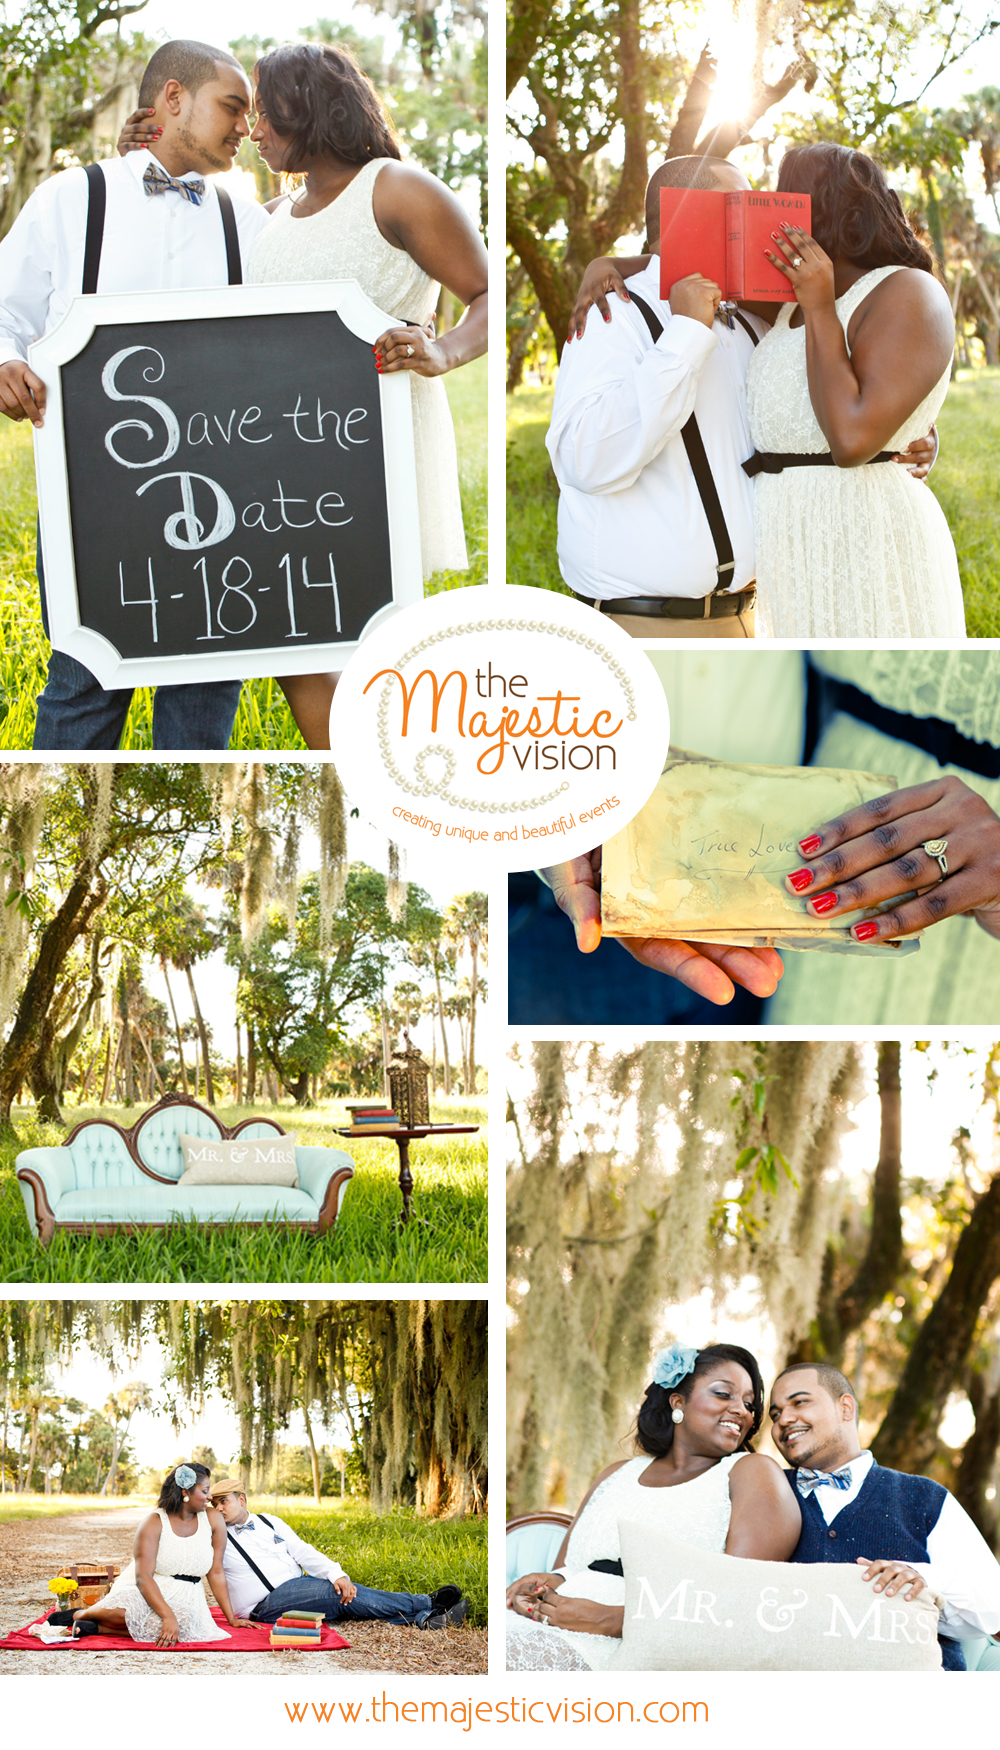 Romantic Vintage Engagement Session | The Majestic Vision Wedding Planning | Riverbend Park in Palm Beach, FL | www.themajesticvision.com | Krystal Zaskey Photography